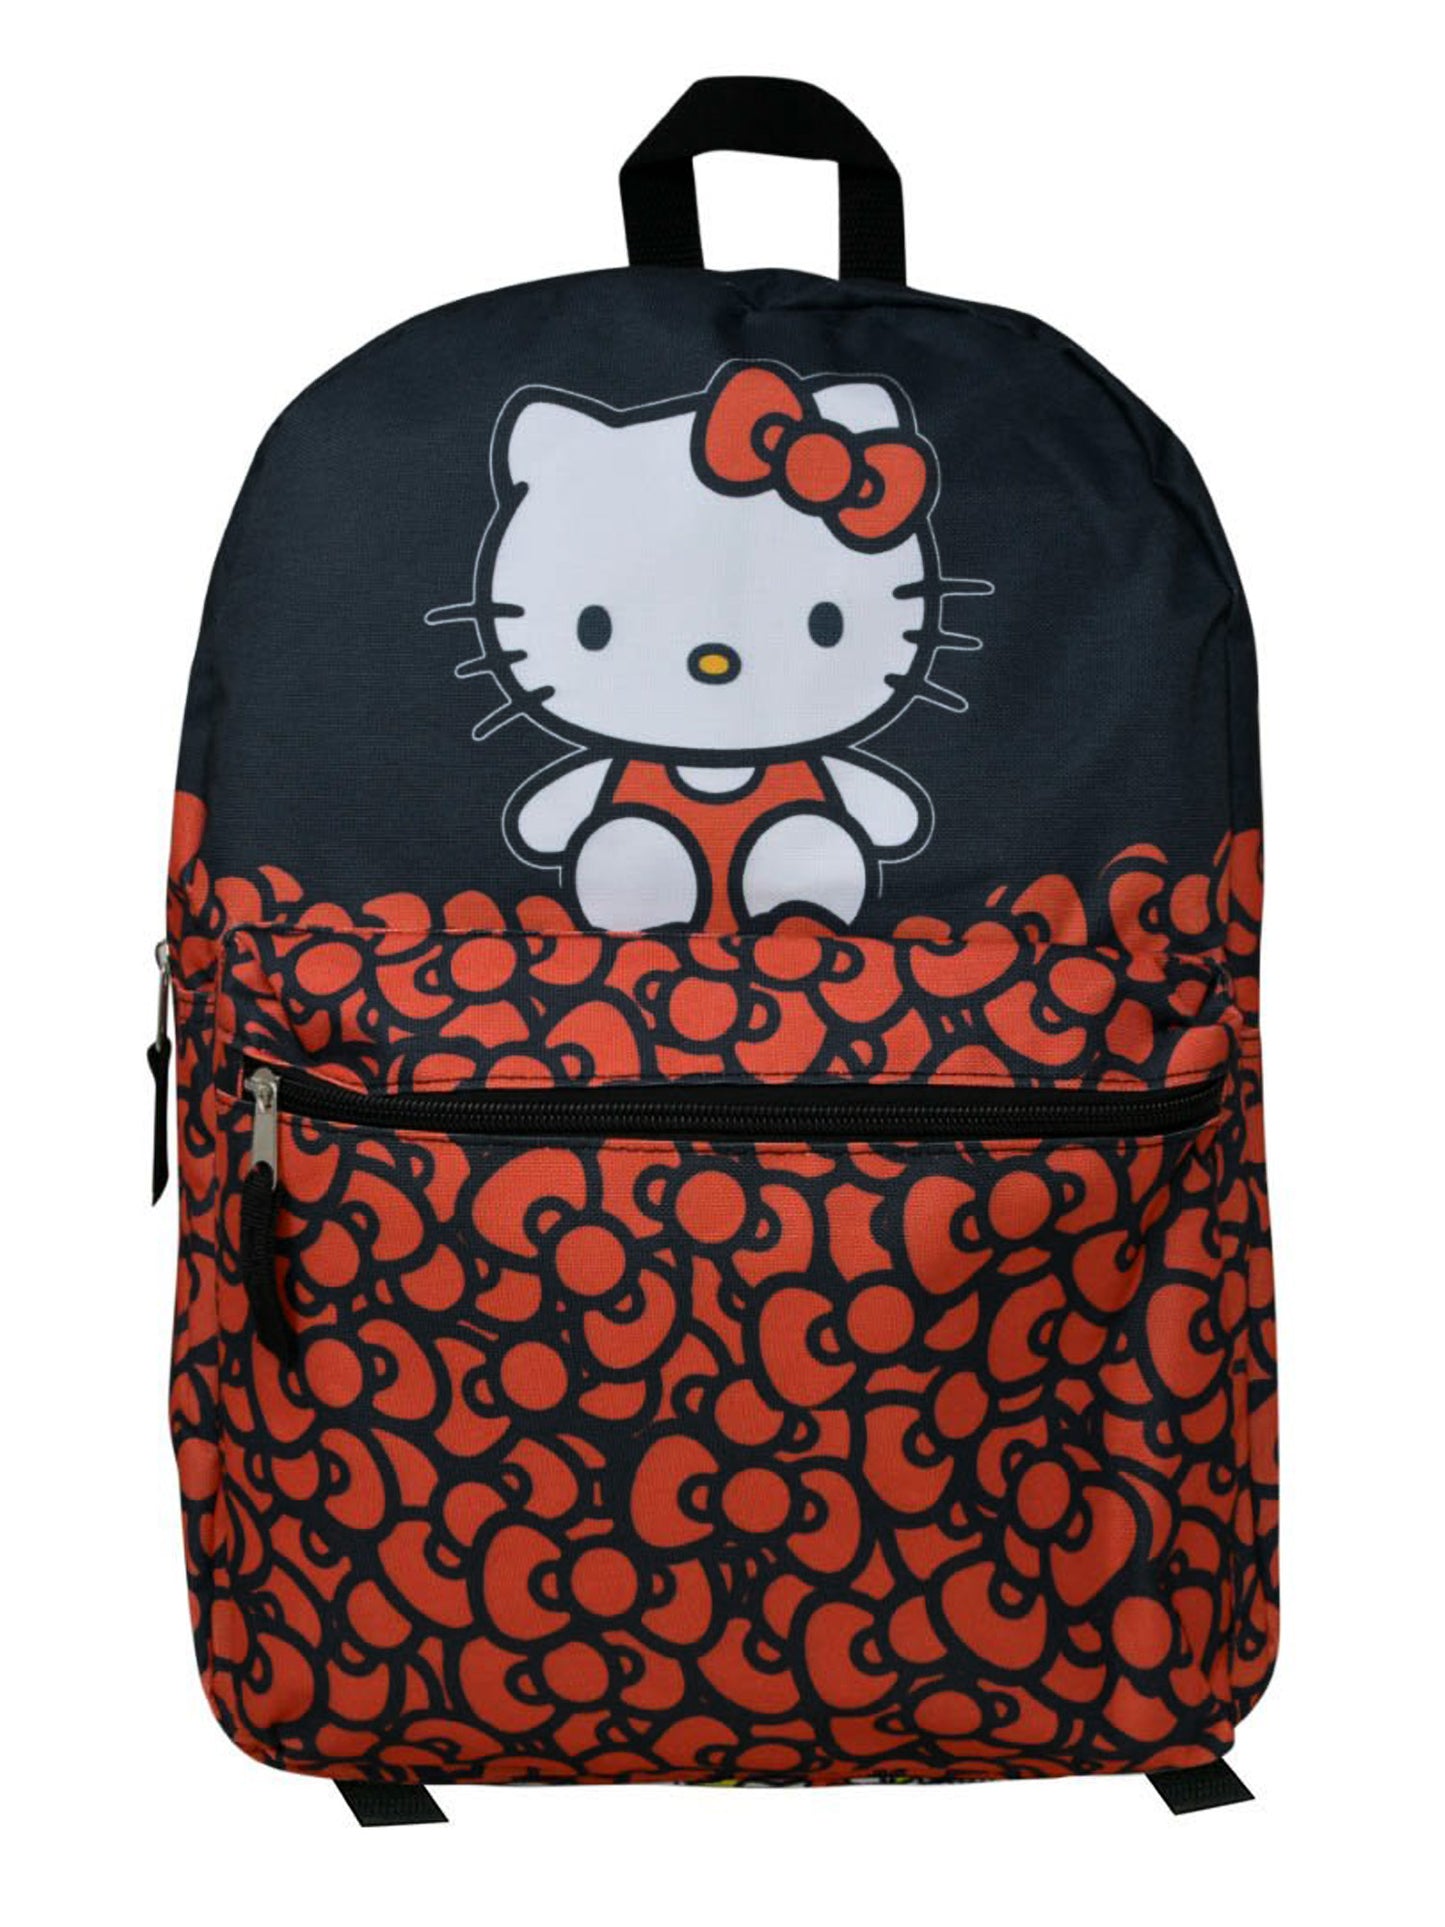 Hello Kitty Backpack 16" Sanrio Red Bows Girls Black